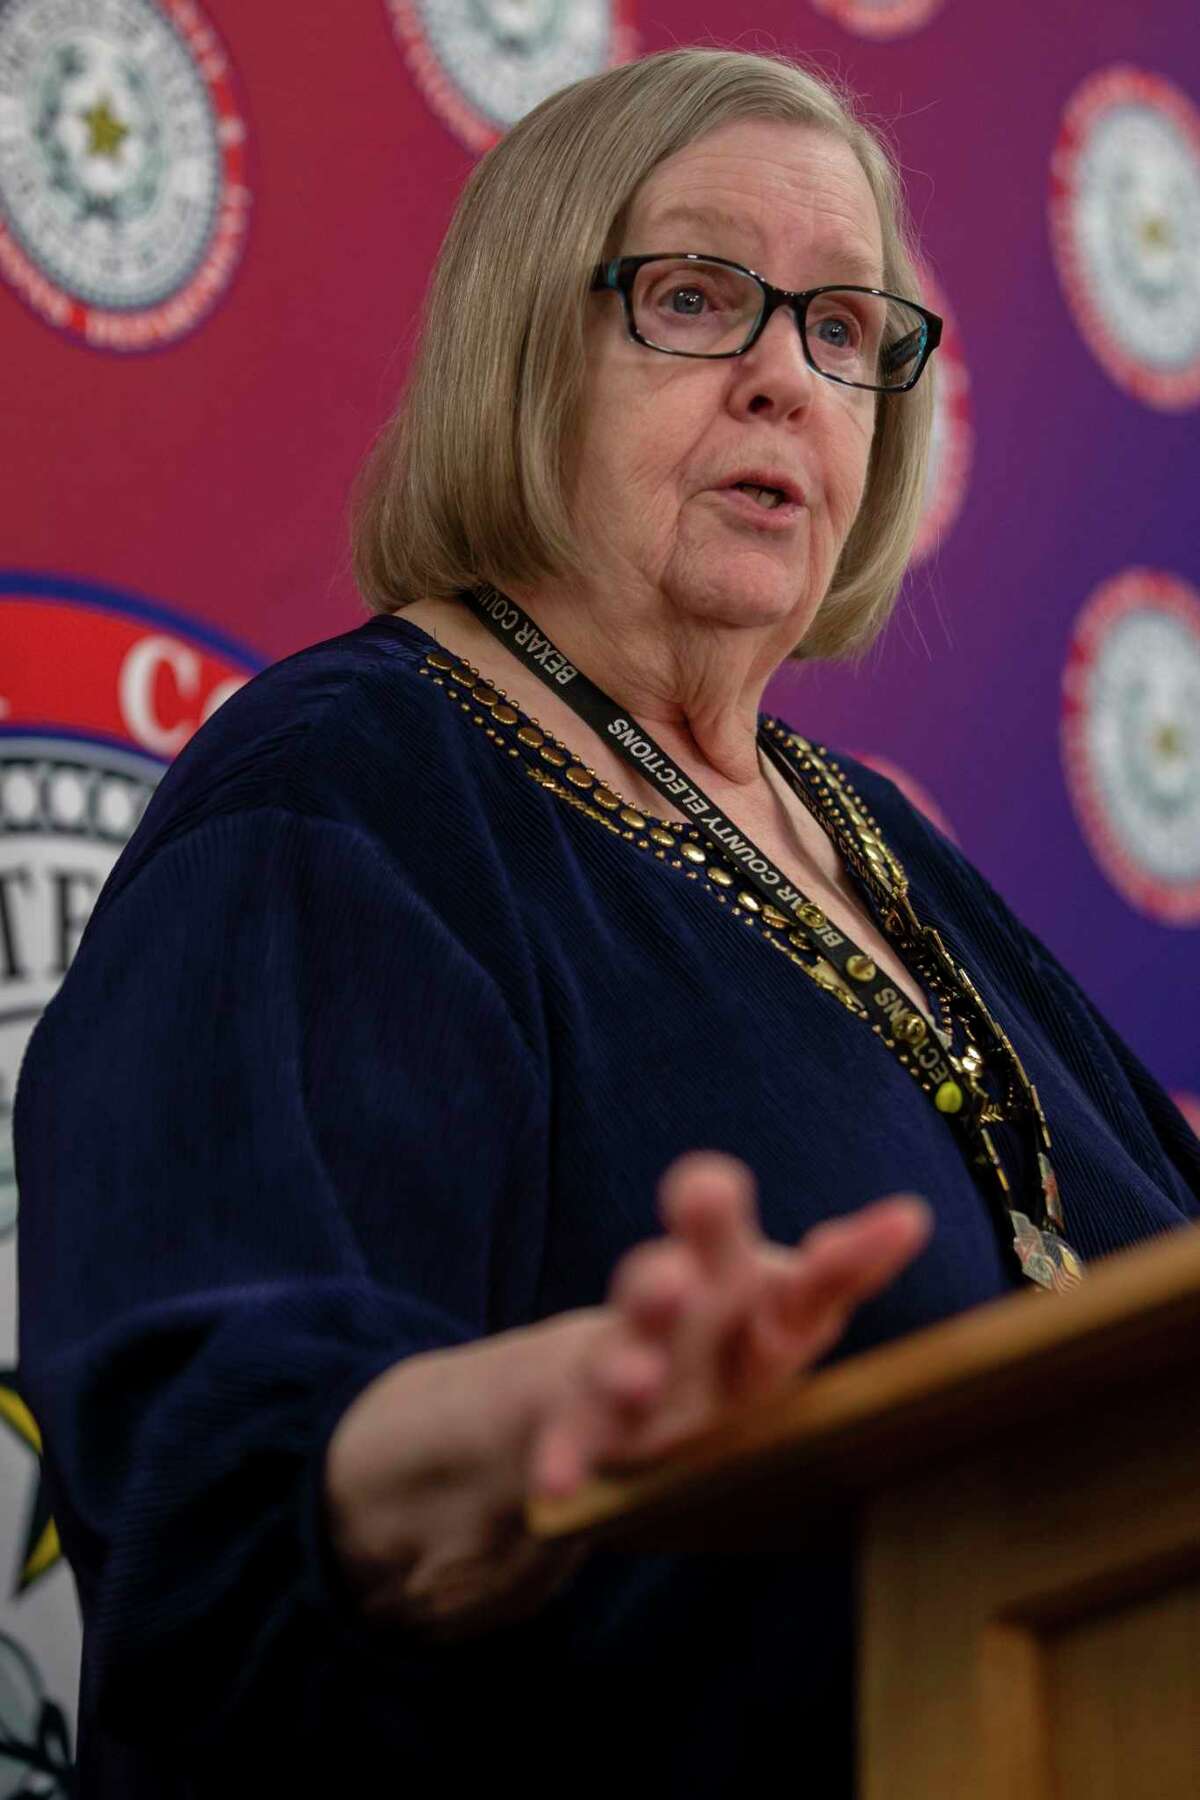 Bexar County Elections Administrator Jacque Callanen discusses the primary election results and reporting of results with a new system during a press conference held at the Bexar County Elections Department on March 4.